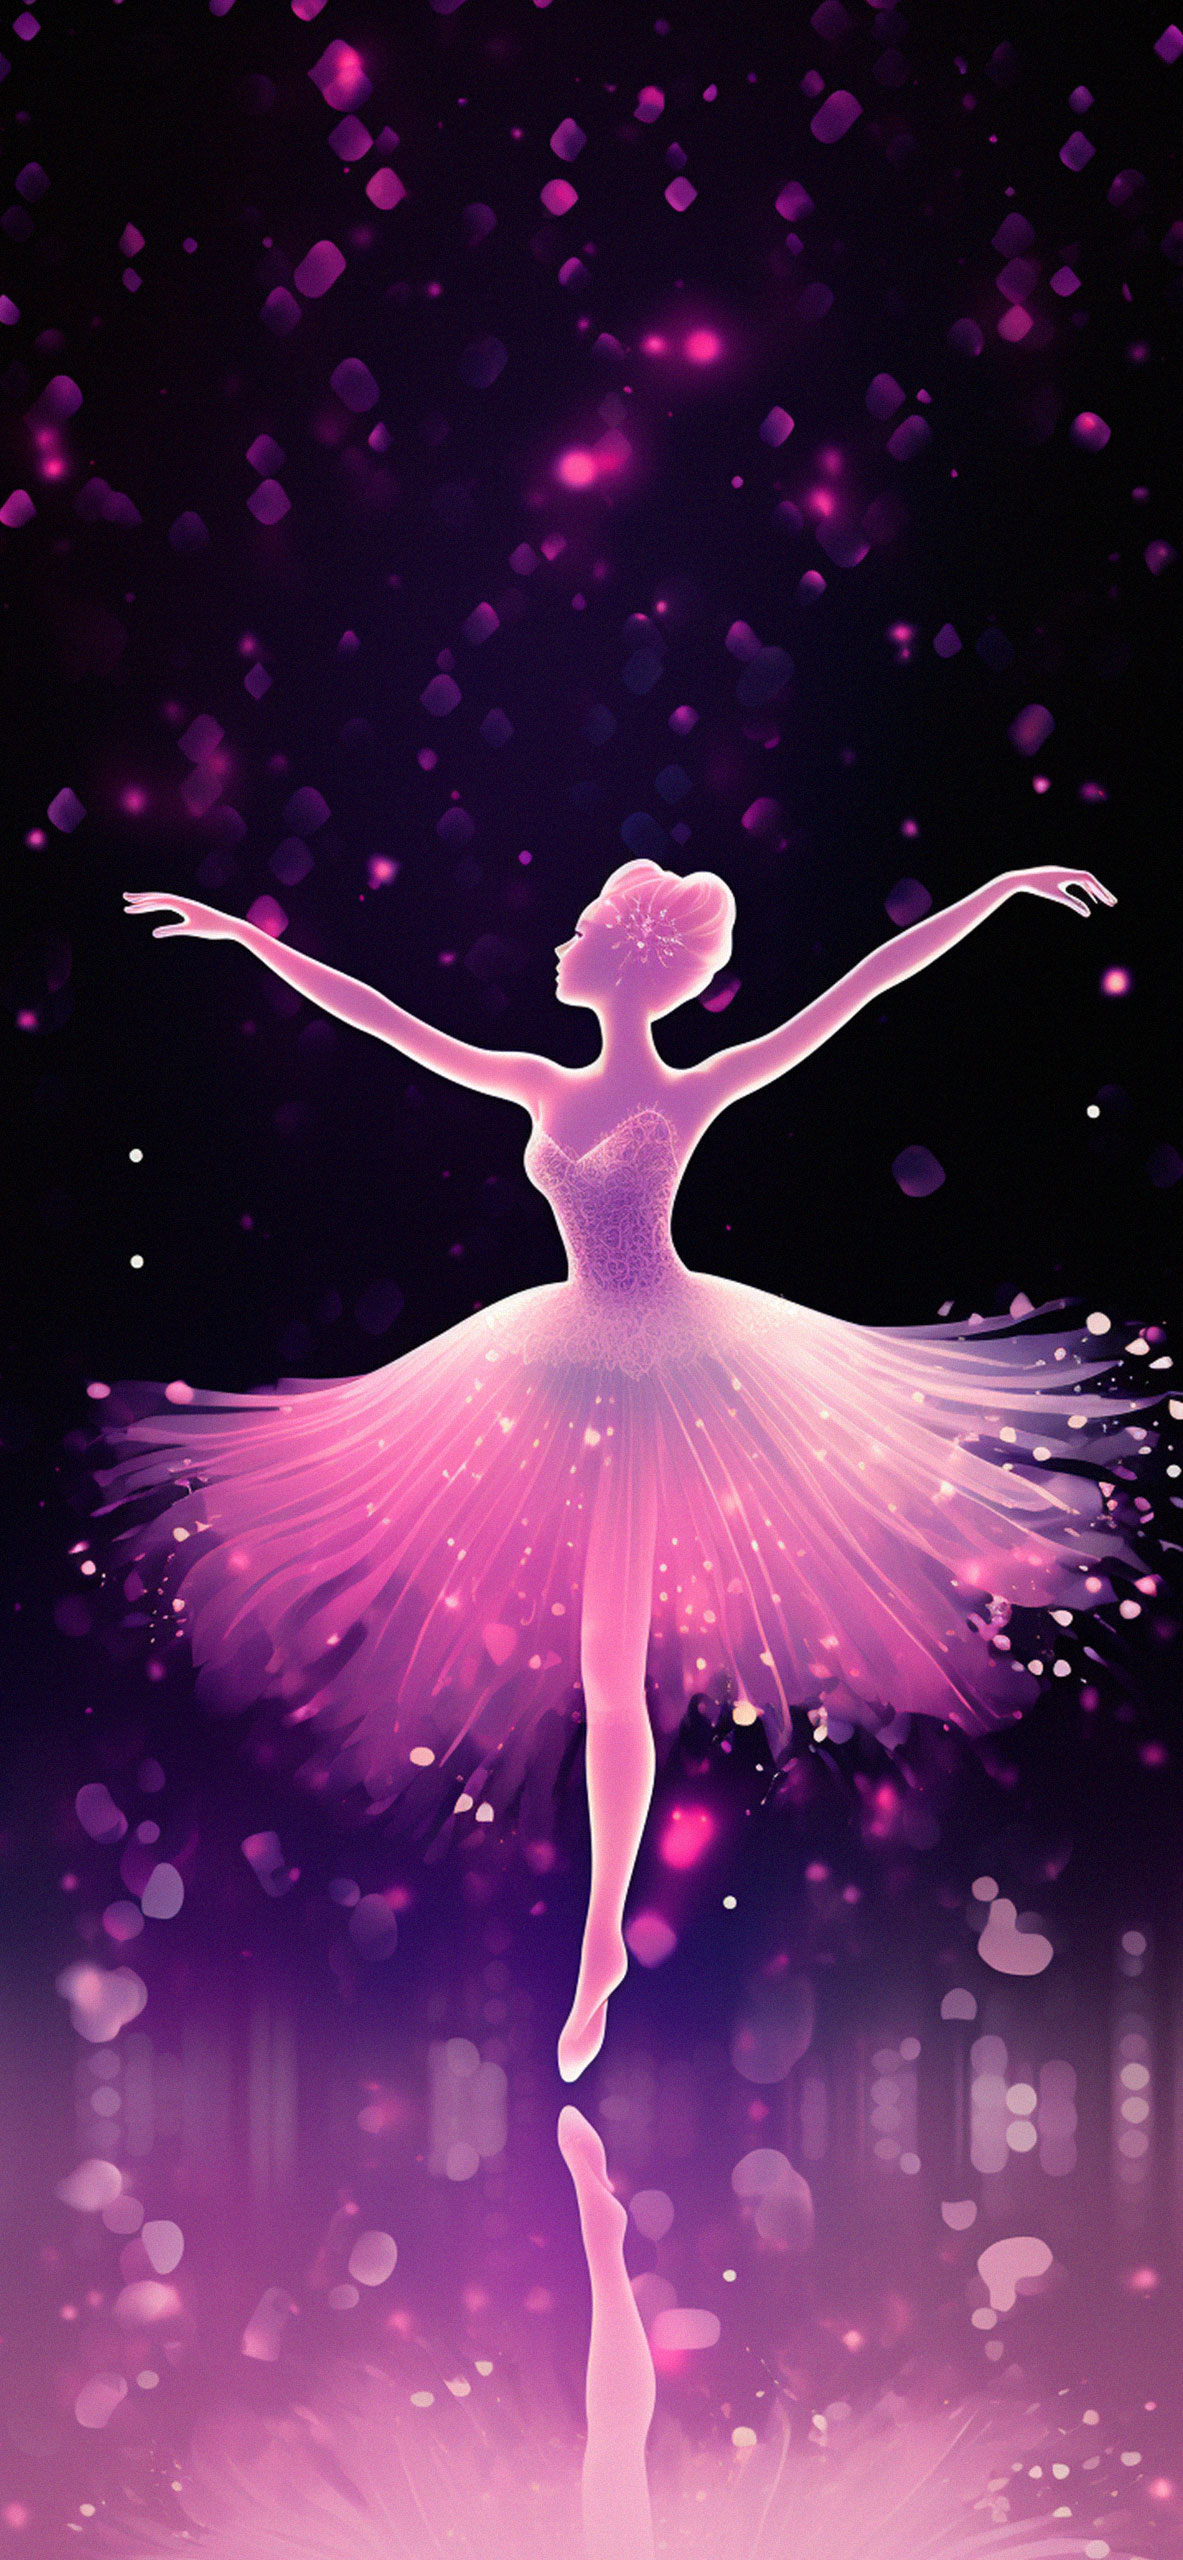 Dance Phone Wallpapers - Top Free Dance Phone Backgrounds - WallpaperAccess